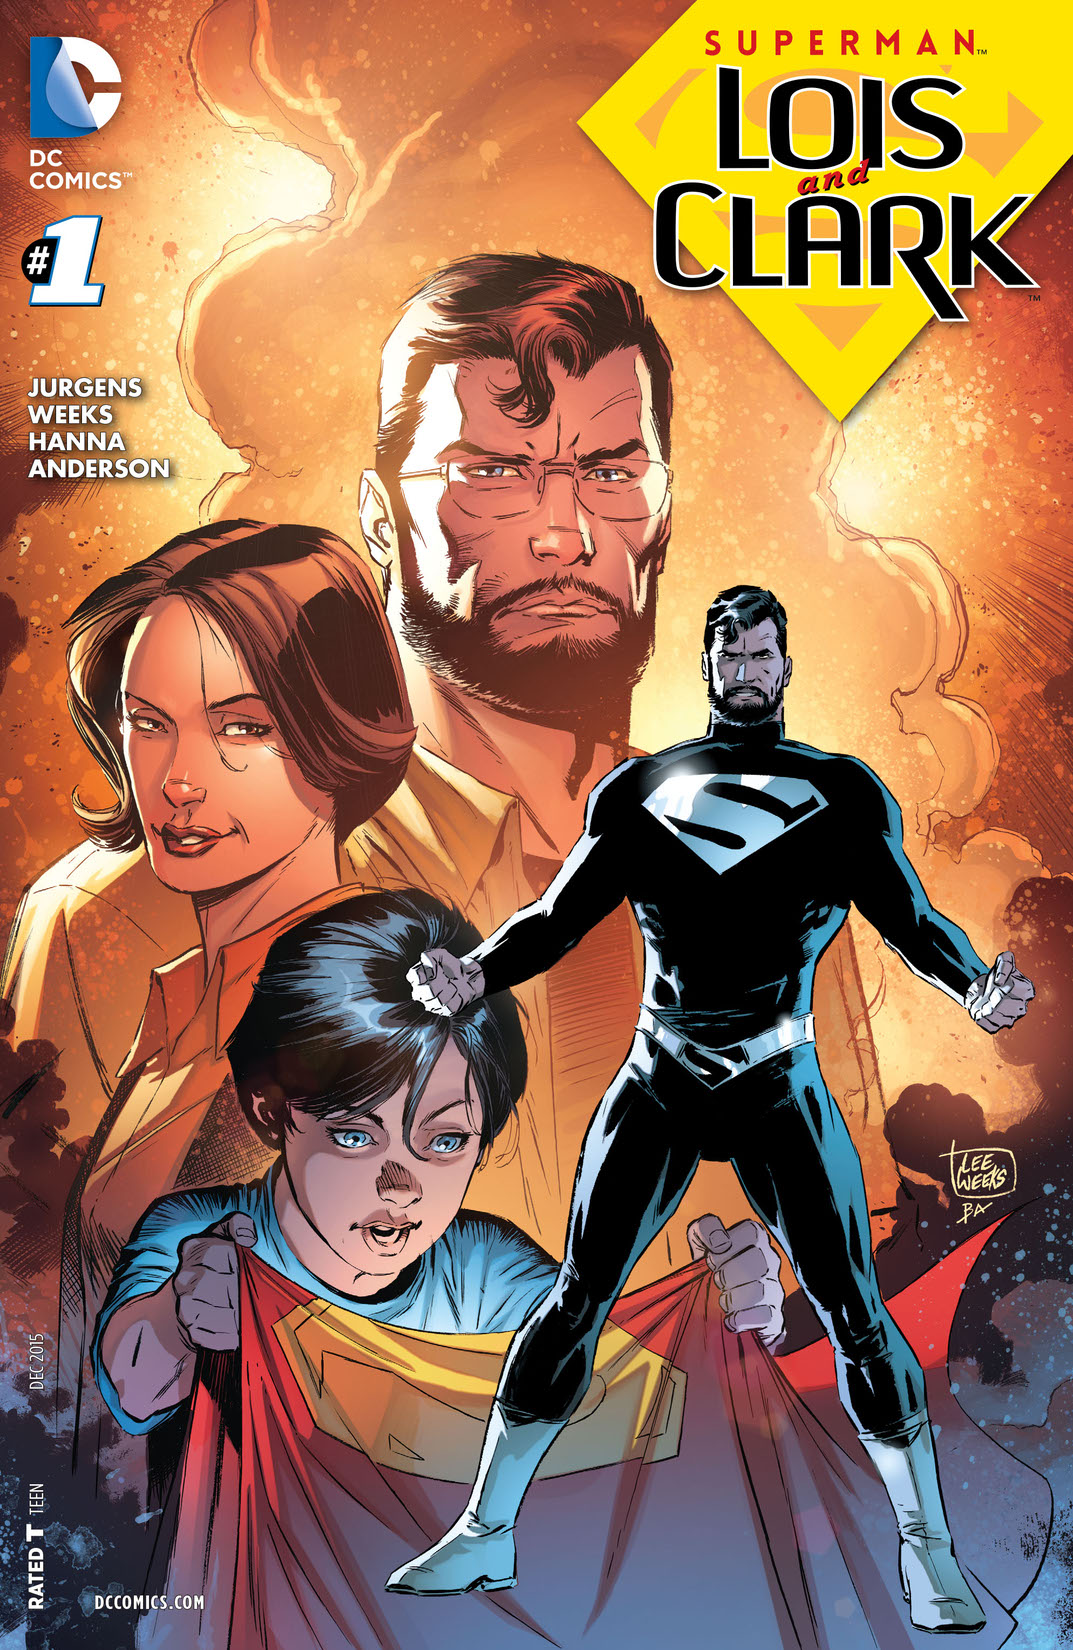 Superman: Lois and Clark #1 preview images